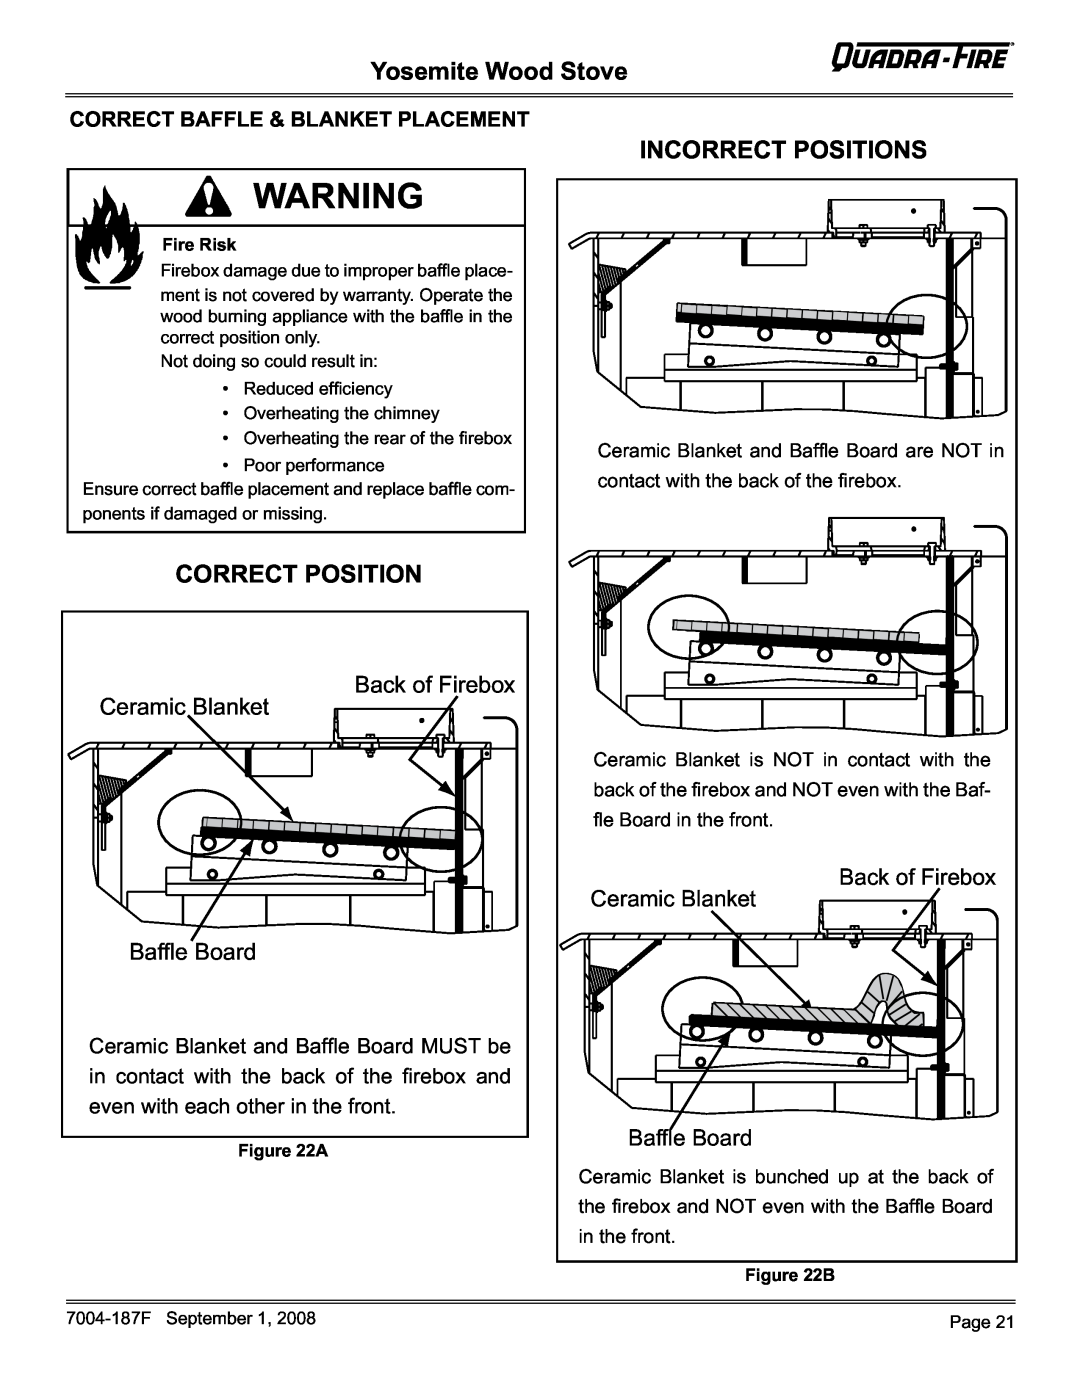 Hearth and Home Technologies MBK Incorrect Positions, Correct Position, Back of Firebox Ceramic Blanket Baffle Board, A 